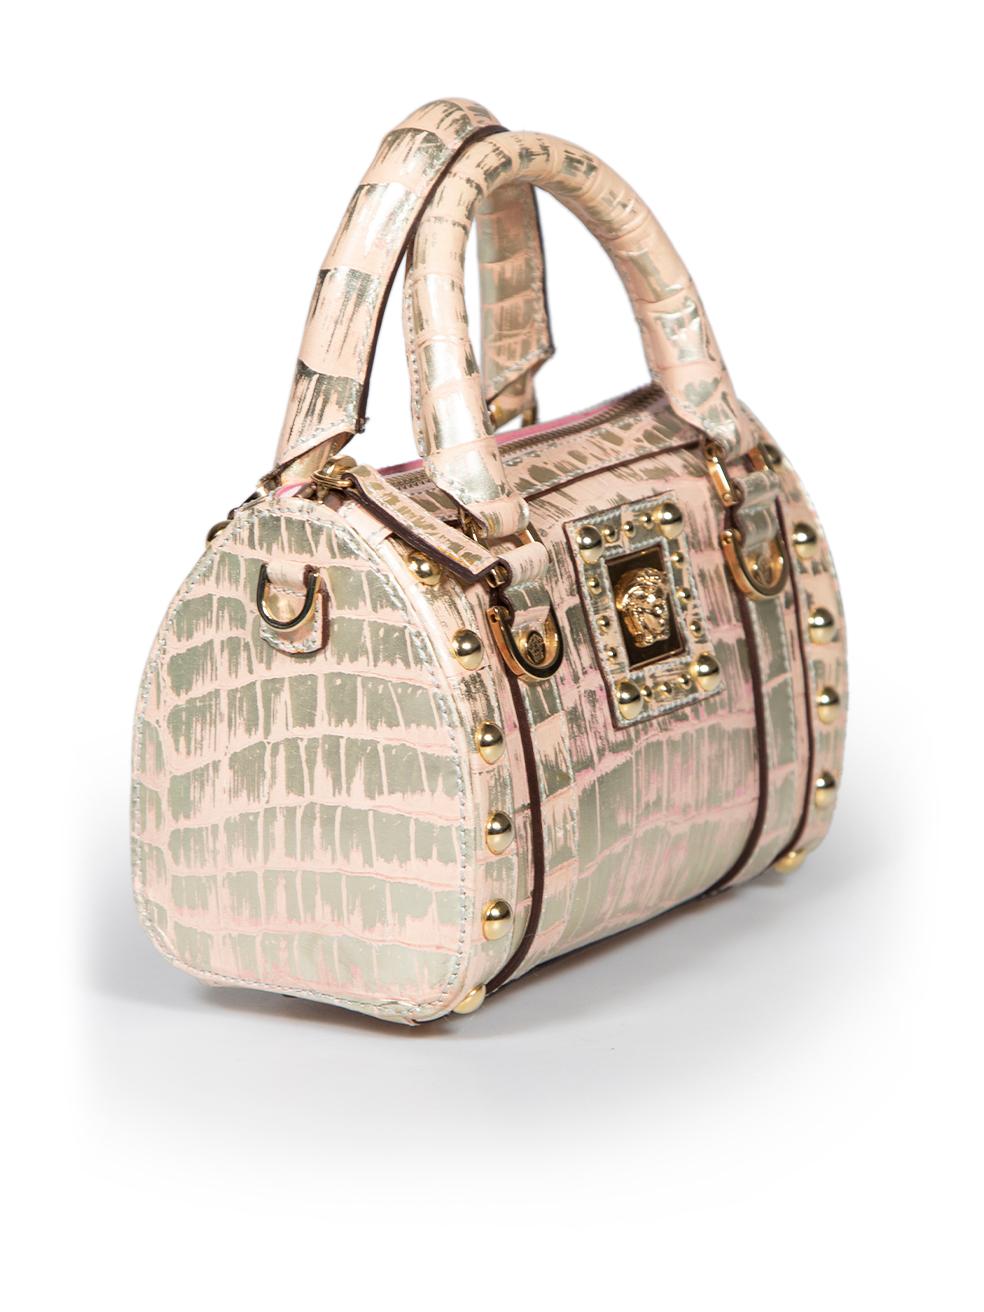 CONDITION is Very good. Minimal wear to bag is evident. Minimal wear to the front and sides with marks and scratches to the leather on this used Versace designer resale item.
 
 
 
 Details
 
 
 Pink
 
 Leather
 
 Mini crossbody bag
 
 Crocodile